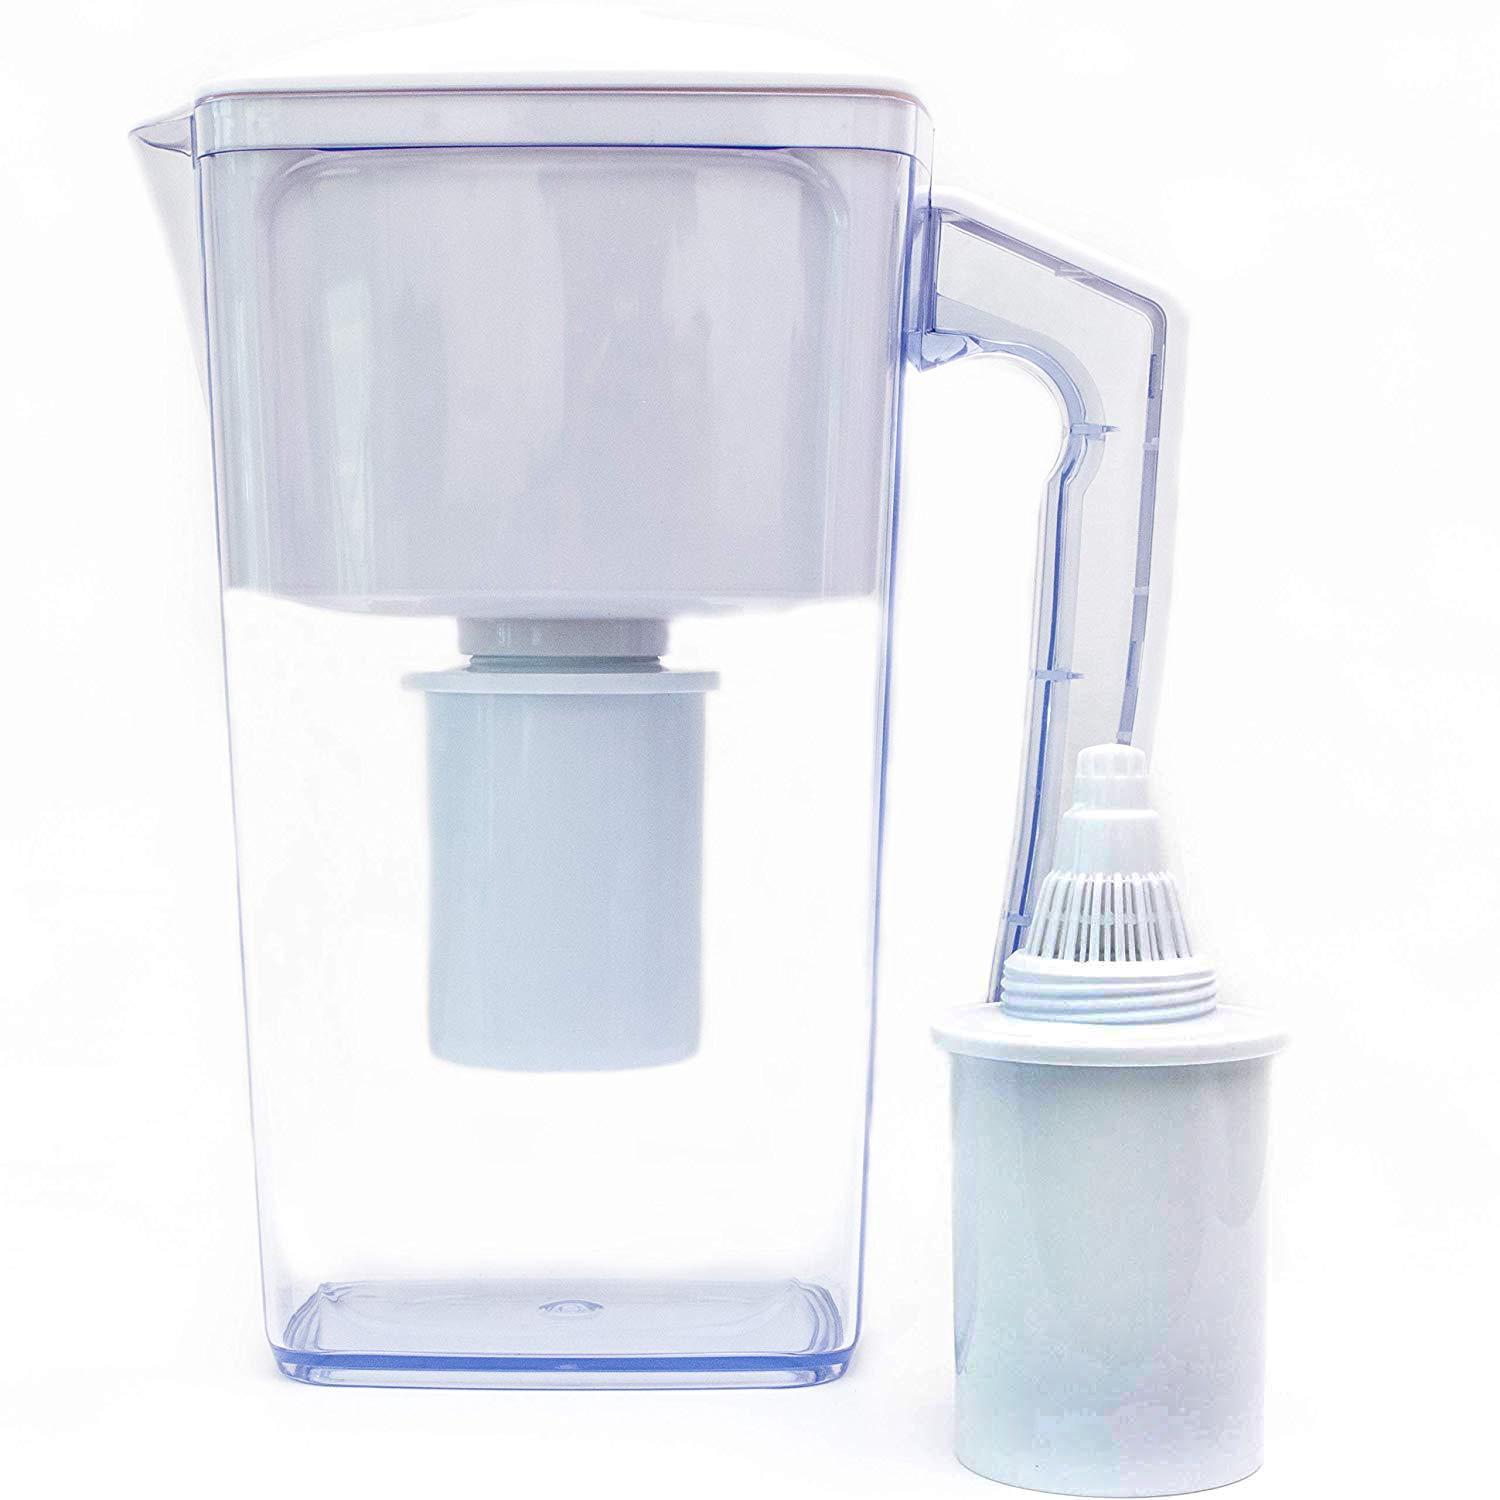 Alkaline Water Filter Pitcher with Infuser, Glass Pitcher with Lid 1.5L | 9.5 PH Alkaline Filters | Tea Pitcher | Borosilicate Glass | Infuser